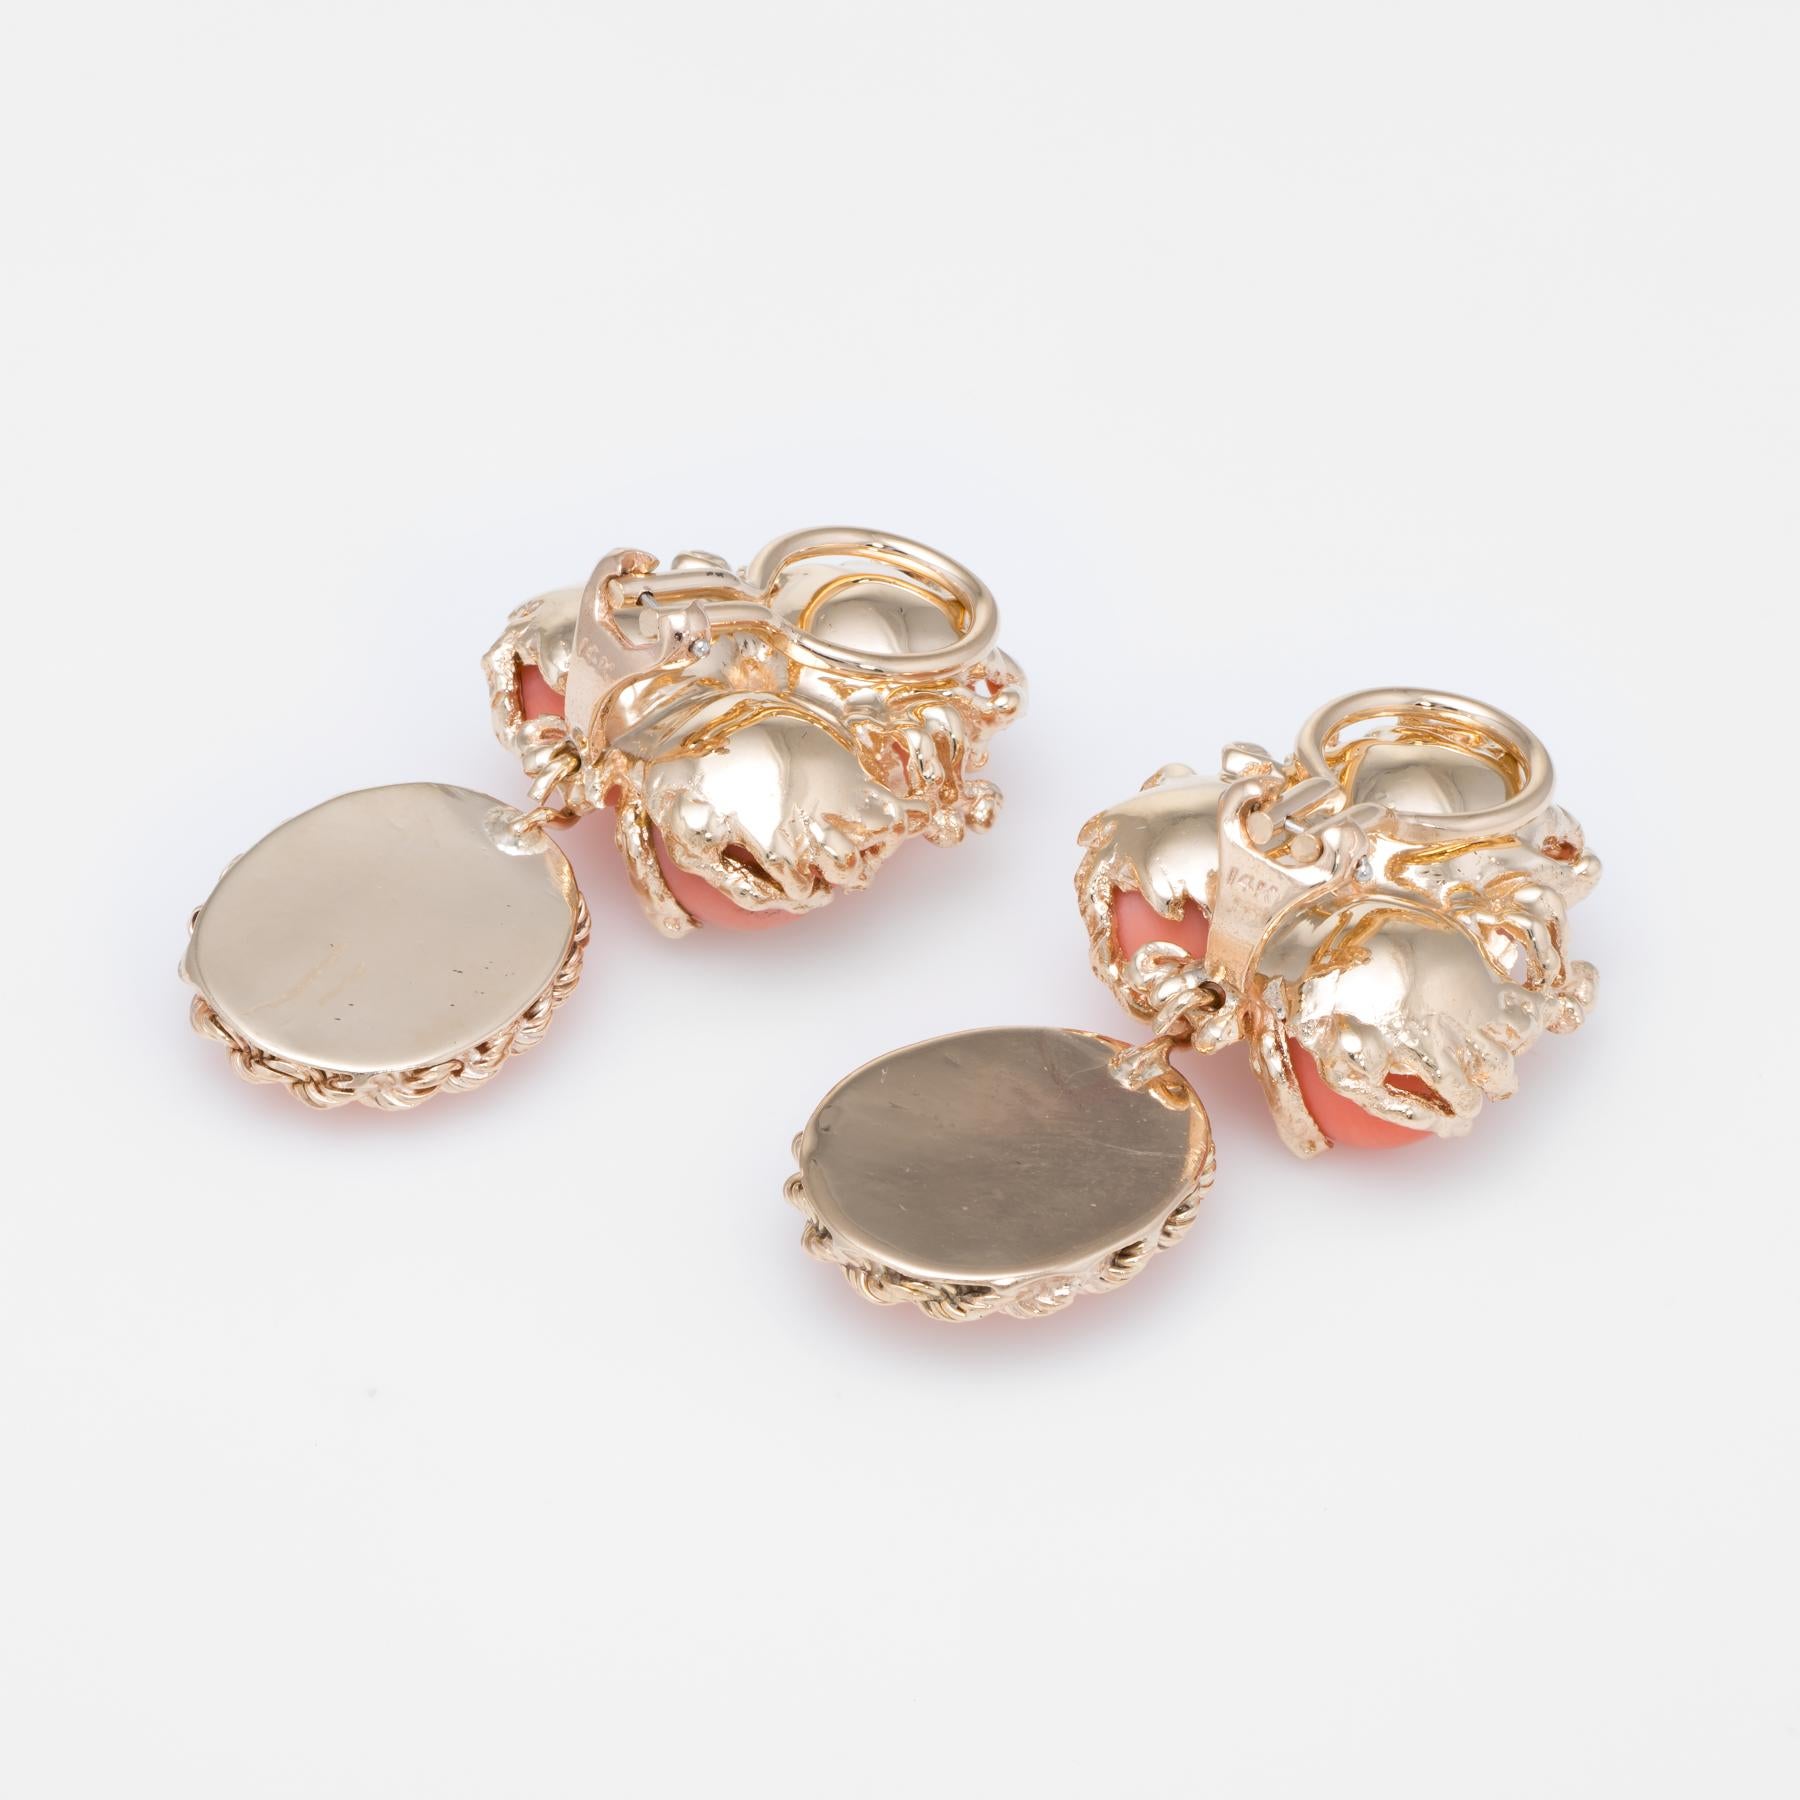 Finely detailed pair of vintage drop earrings (circa 1950s to 1960s), crafted in 14k yellow gold. 

6 pieces of natural coral measure 7mm each (upper) and 13.5mm x 10.5mm (lower). The total coral weight is estimated at 25 carats. Two estimated 0.15